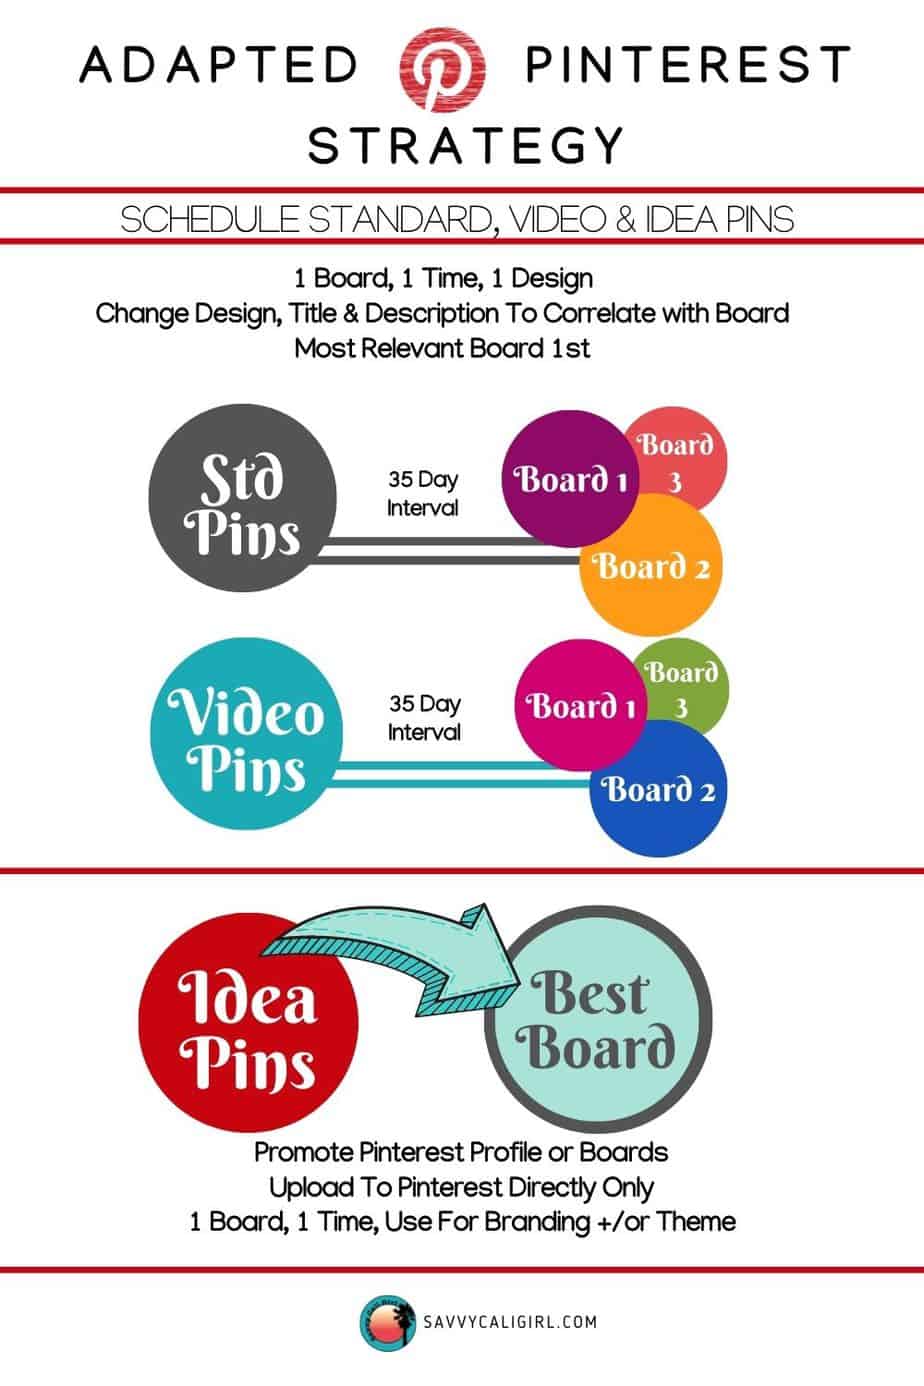 Pinterest Pinning Strategy Infographic